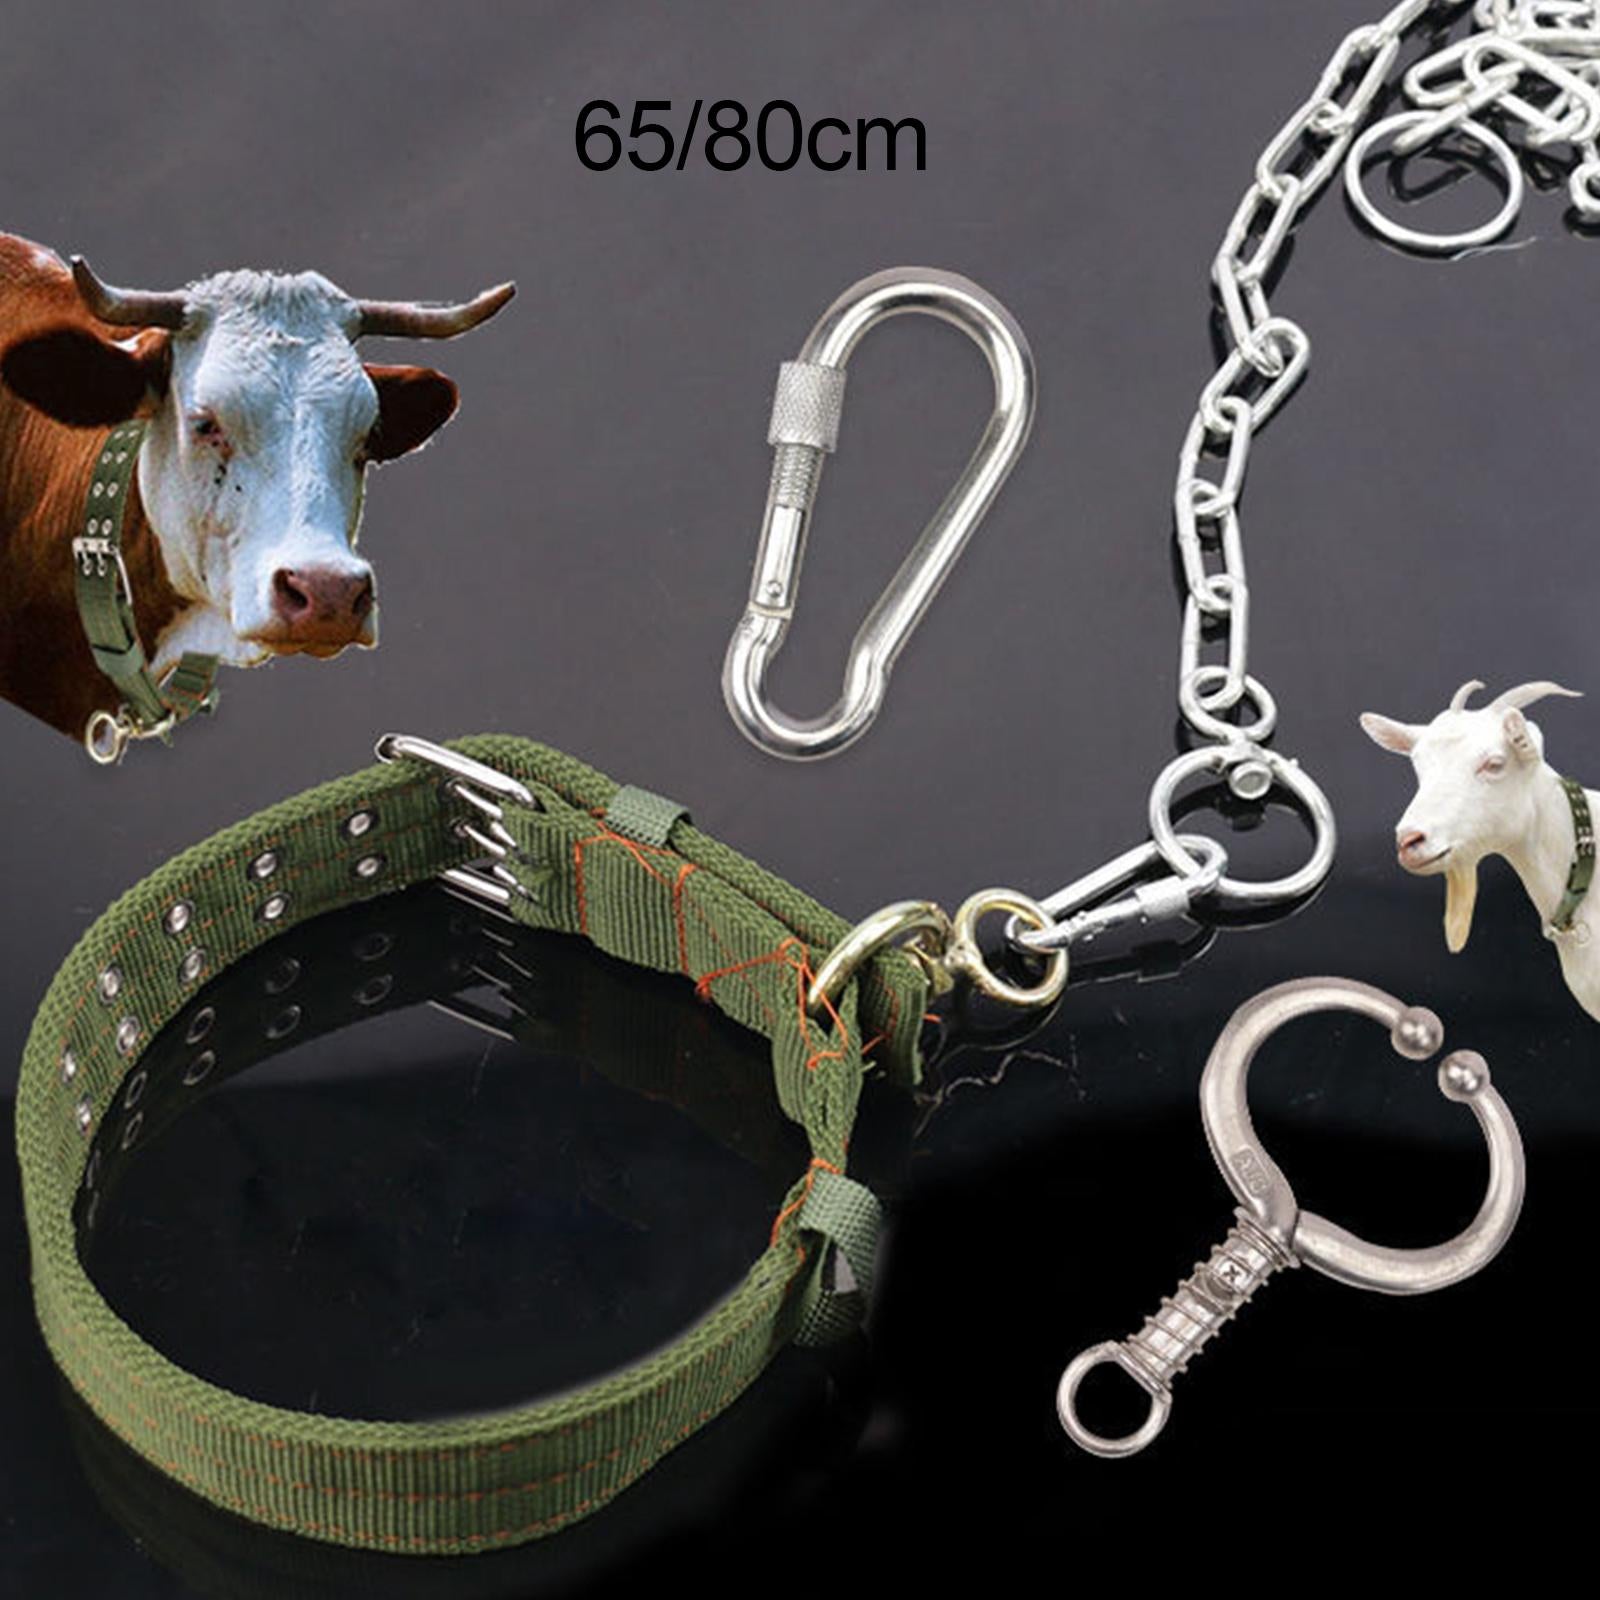 Multifunction Cow Collar Oxford Cloth Adjustable Thicken for Sheep Cow 65cm